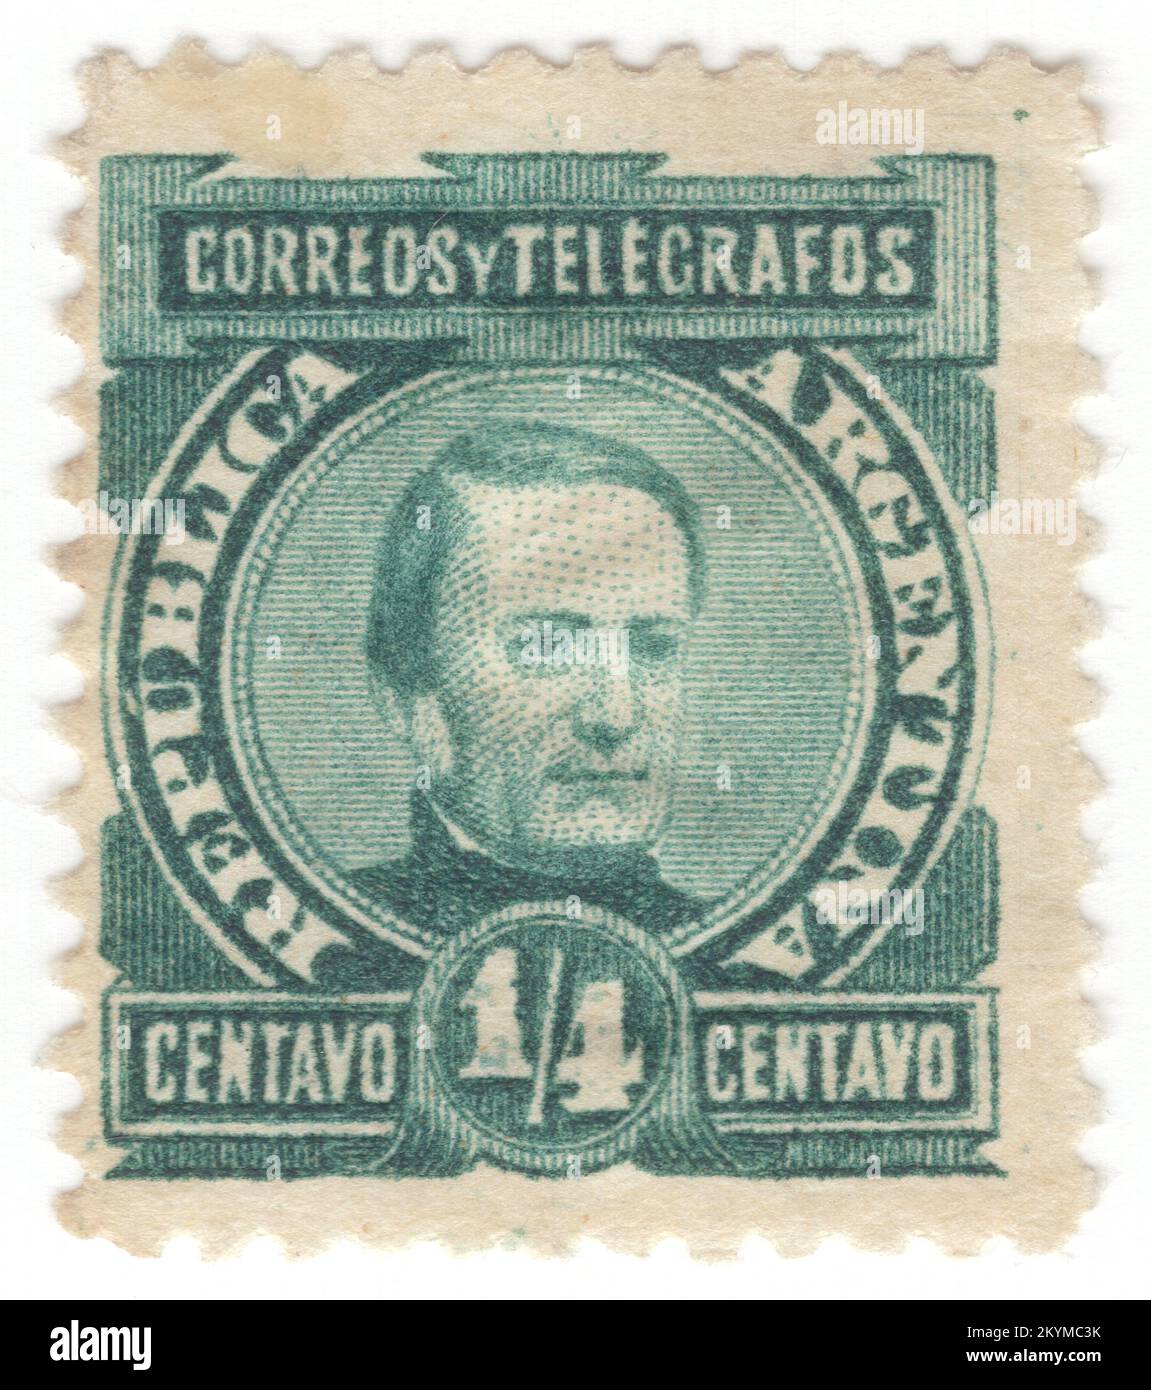 ARGENTINA - 1890: ¼ centavos green postage stamp depicting portrait of Brigadier General Jose Maria Paz y Haedo. He was an Argentine military figure, notable in the Argentine War of Independence and the Argentine Civil Wars. In his Memorias, Paz tells about his astonishment to see farm owners fighting and declaring war against the central government, and the population supporting them. Unlike Buenos Aires Province, influenced by ideals from the French Revolution, in the inner provinces persisted a colonial structure, though based on caudillos Stock Photo